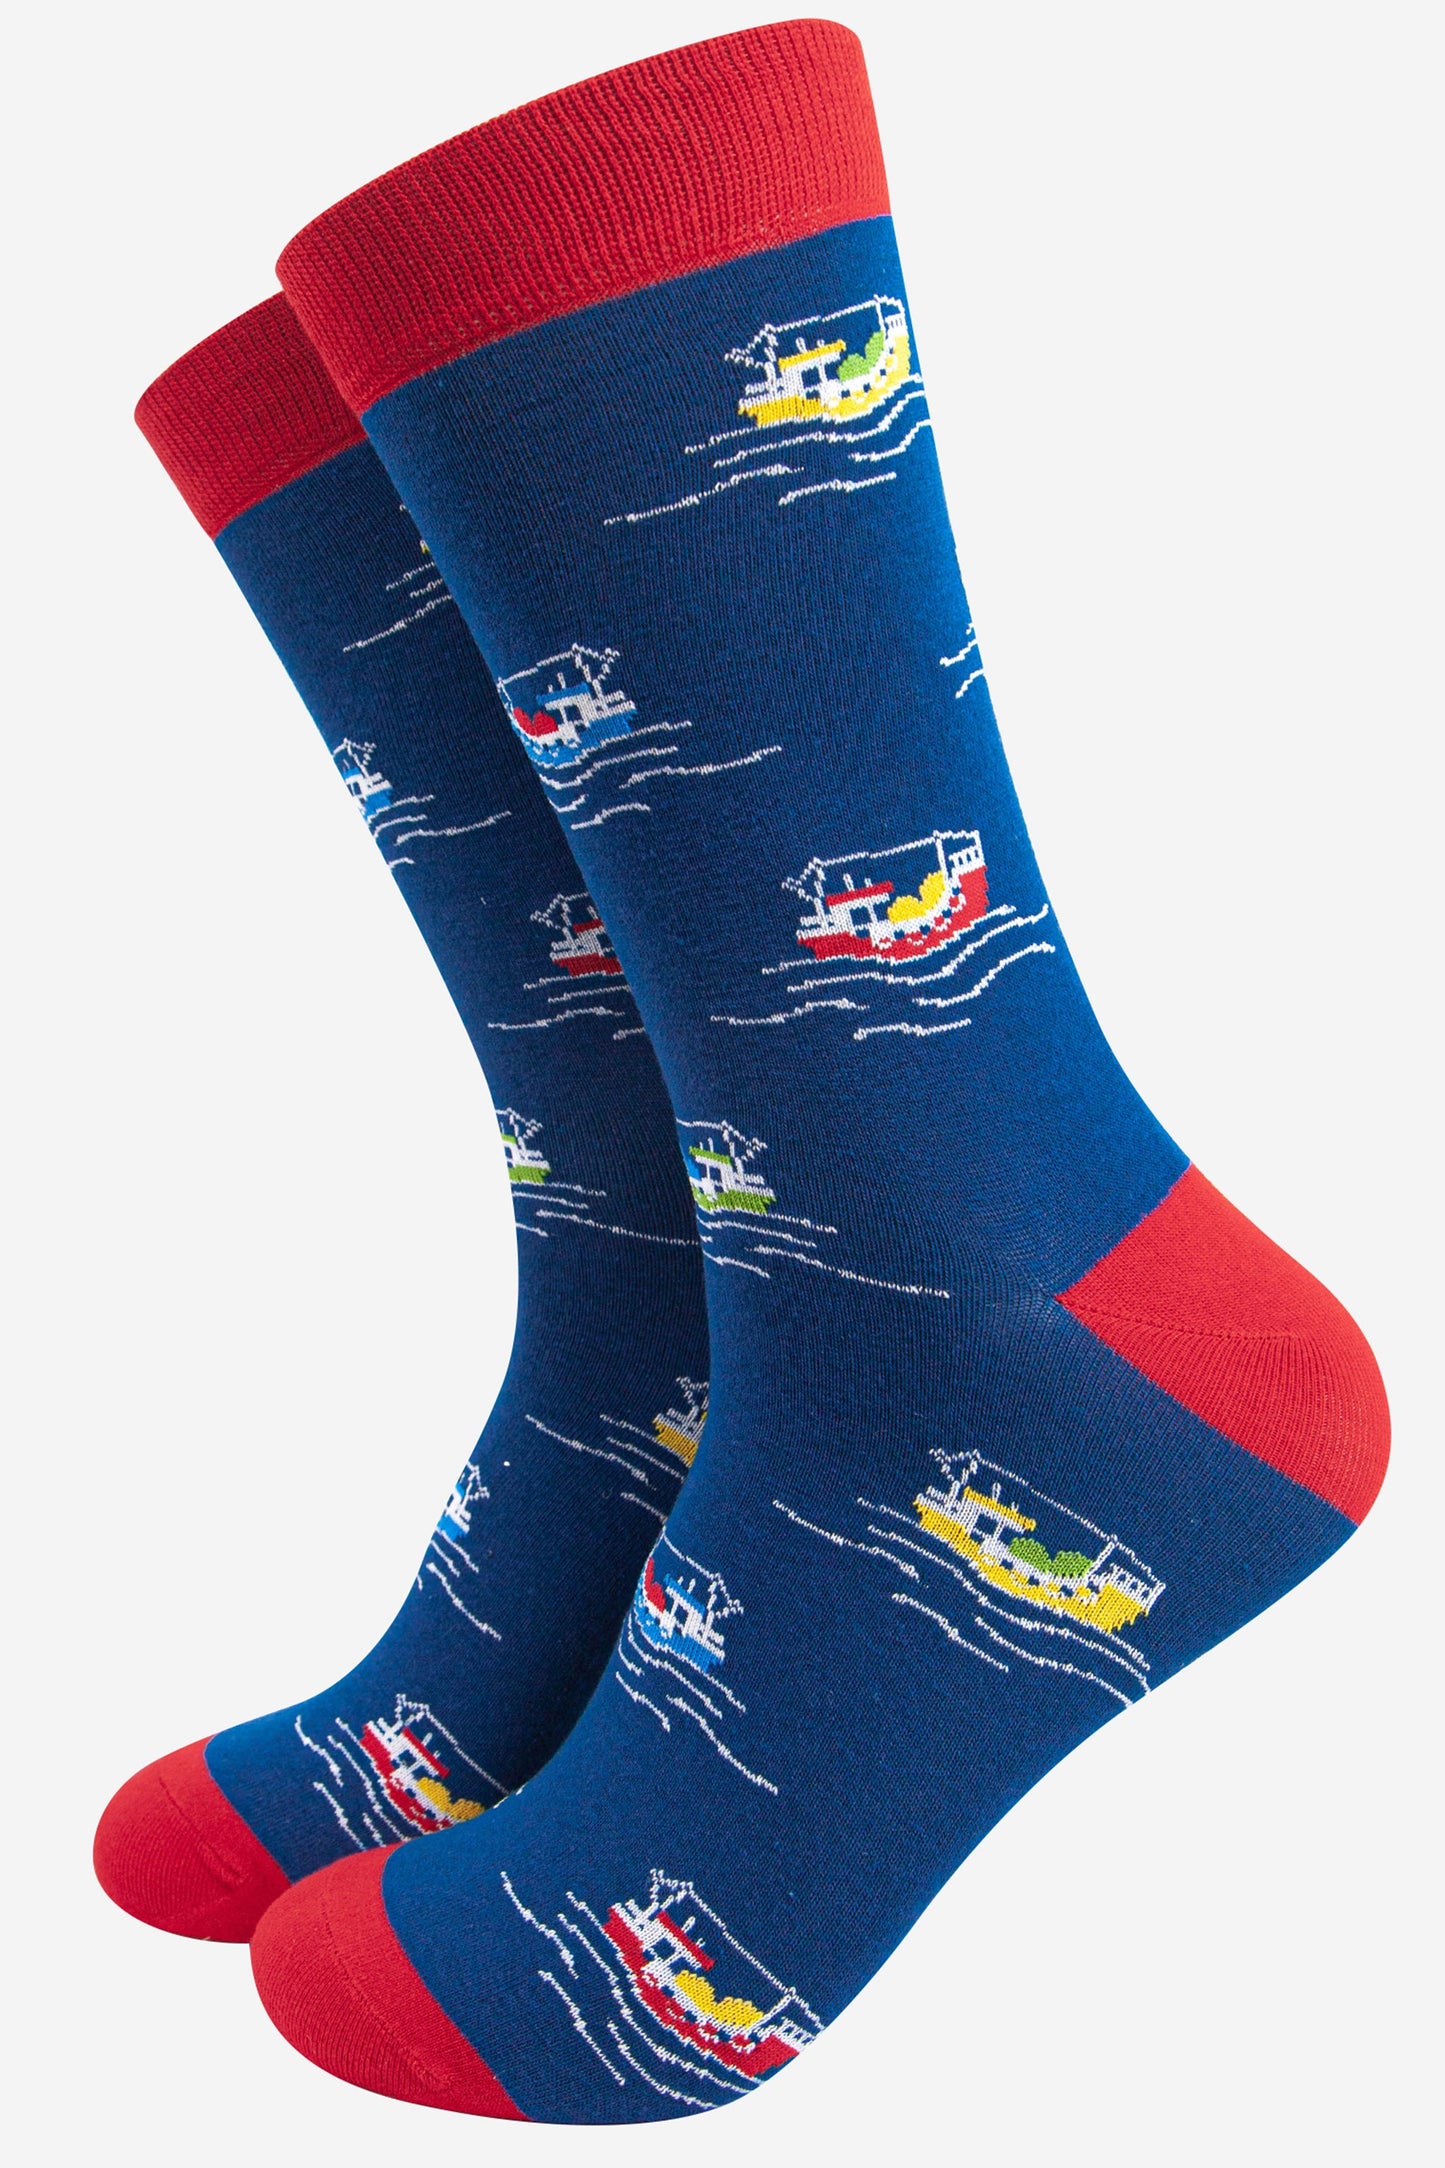 blue bamboo socks with red heel, toe and cuff with an all over pattern of colourful fishing boats at sea